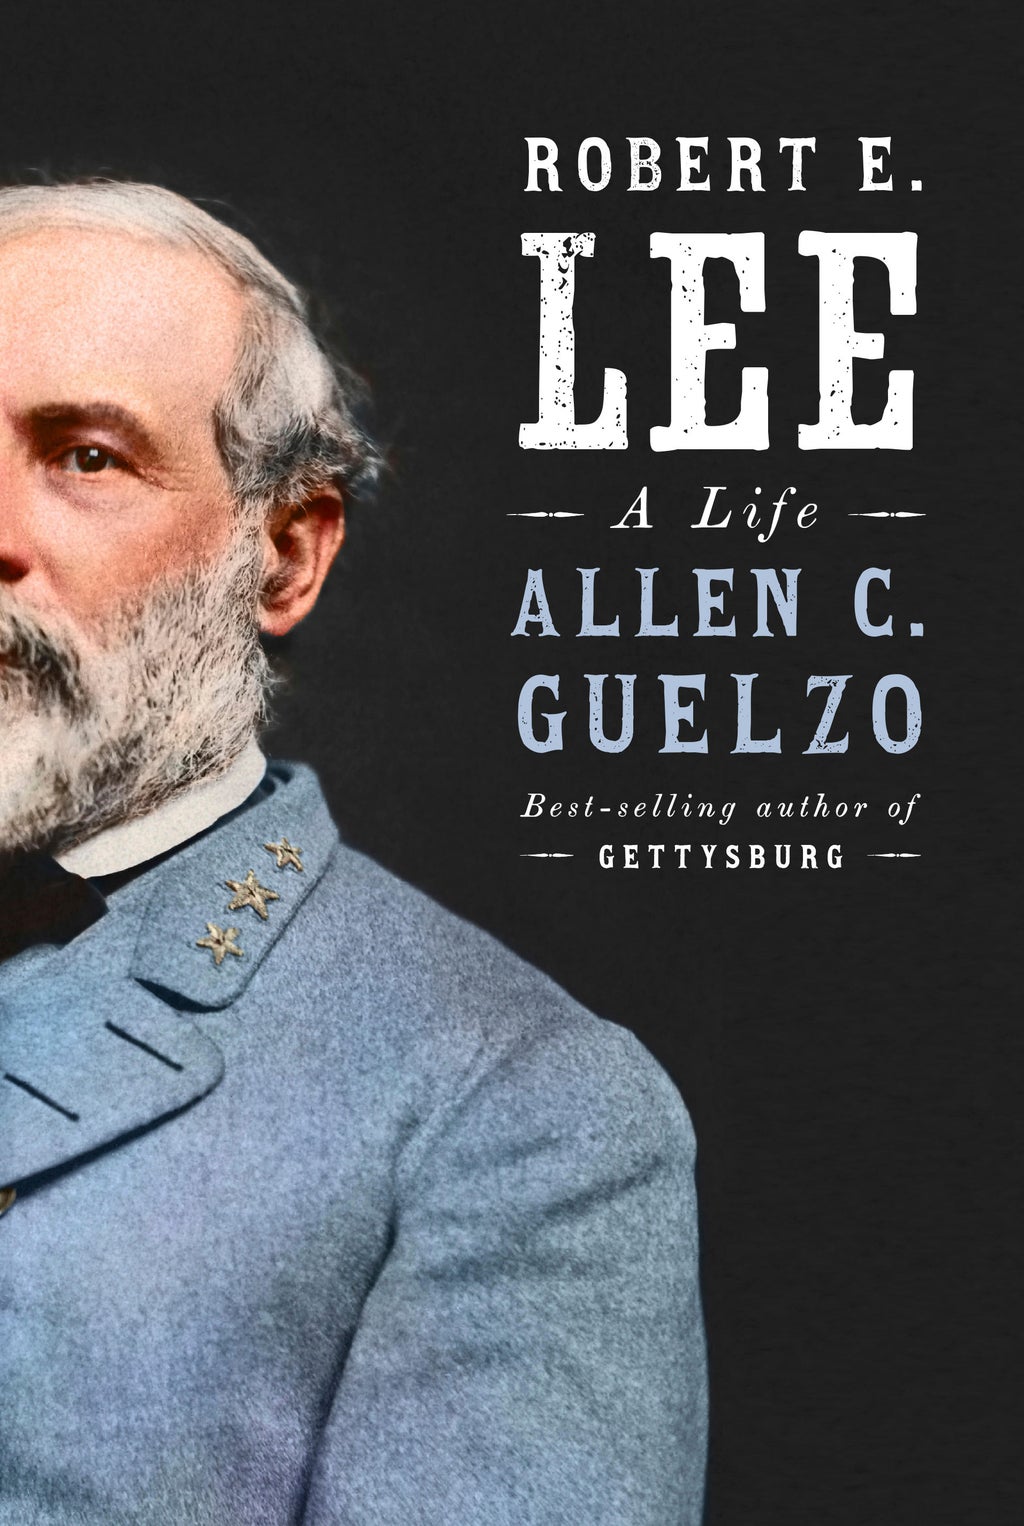 Review: Idolatry surrenders to humanity in new Lee biography